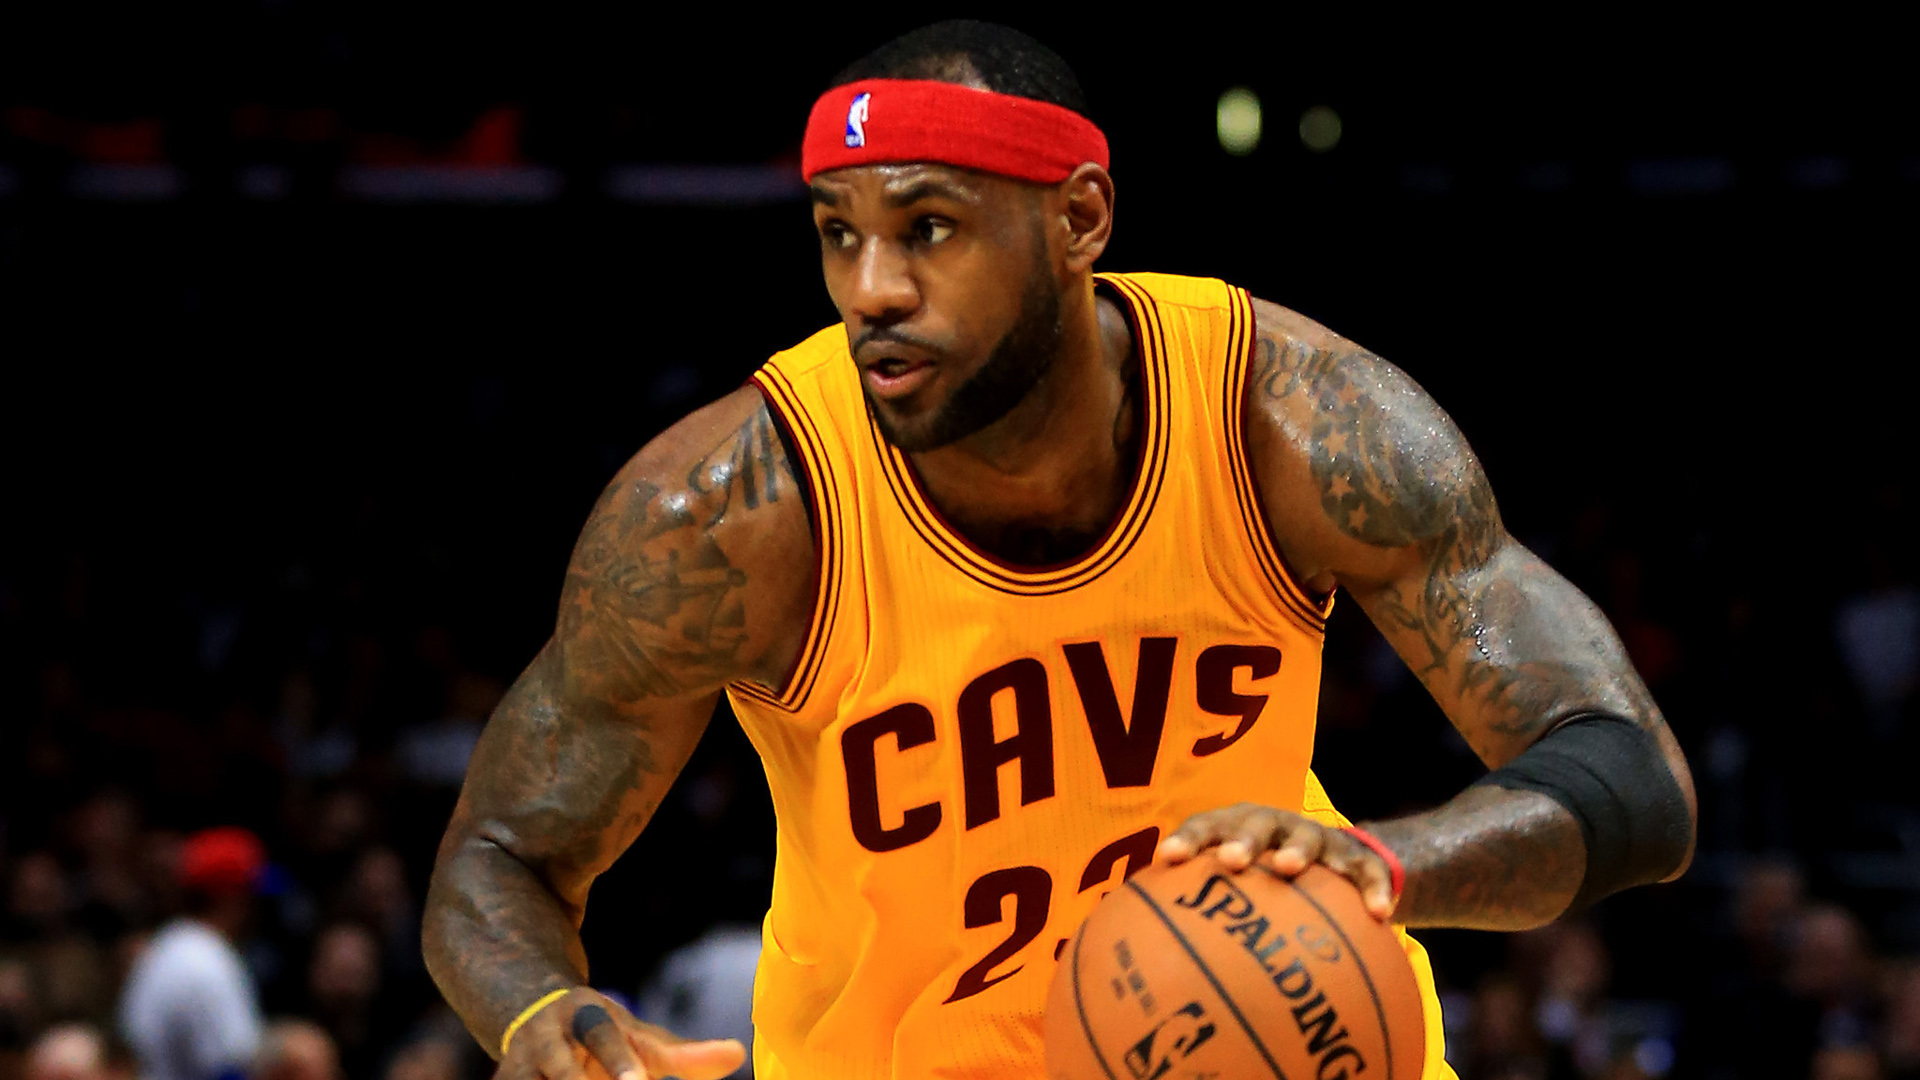 LeBron James Is Tapping Basketball Wearing Yellow Dress And Red Band On Head In A Black Wallpaper HD